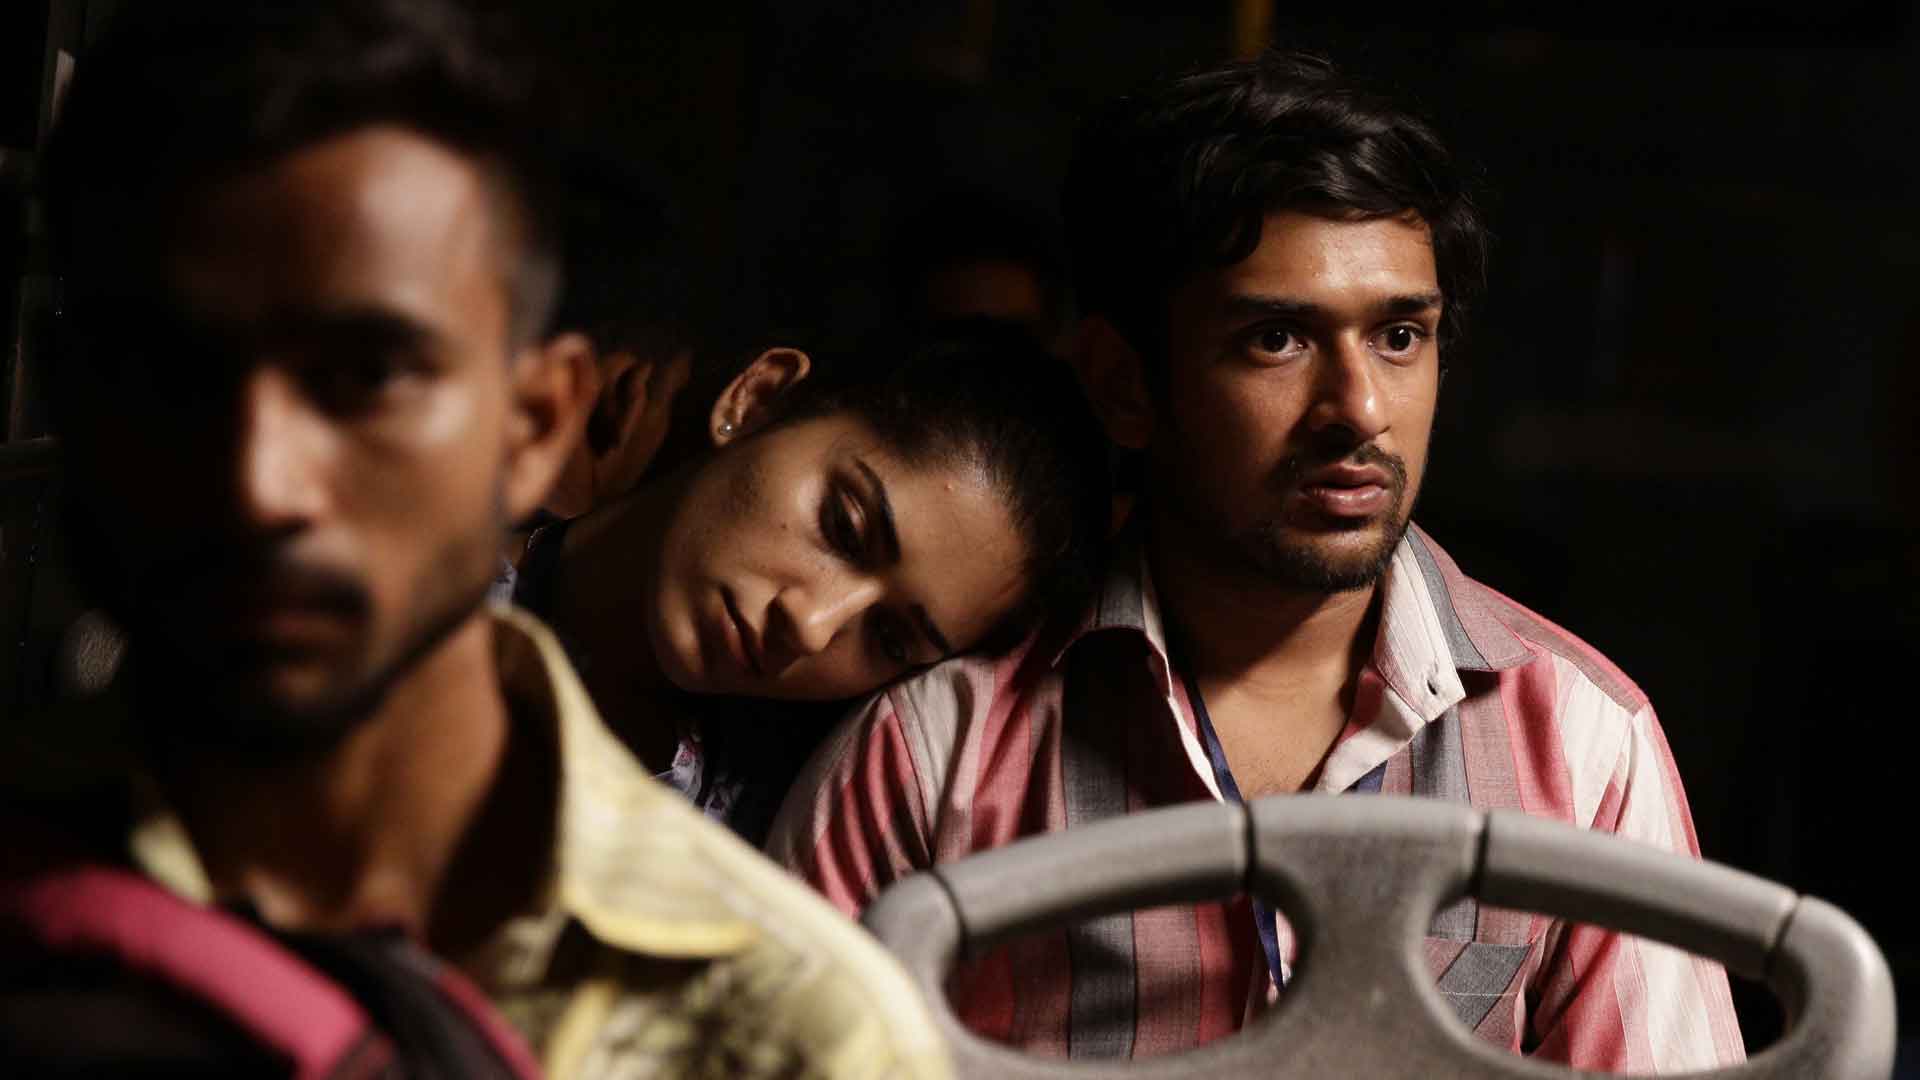 Still image from "Agra," directed by Kanu Behl. A young South Asian man looks nervous while riding in a vehicle with a woman resting her head on his shoulder. A blurred driver is to the far left.